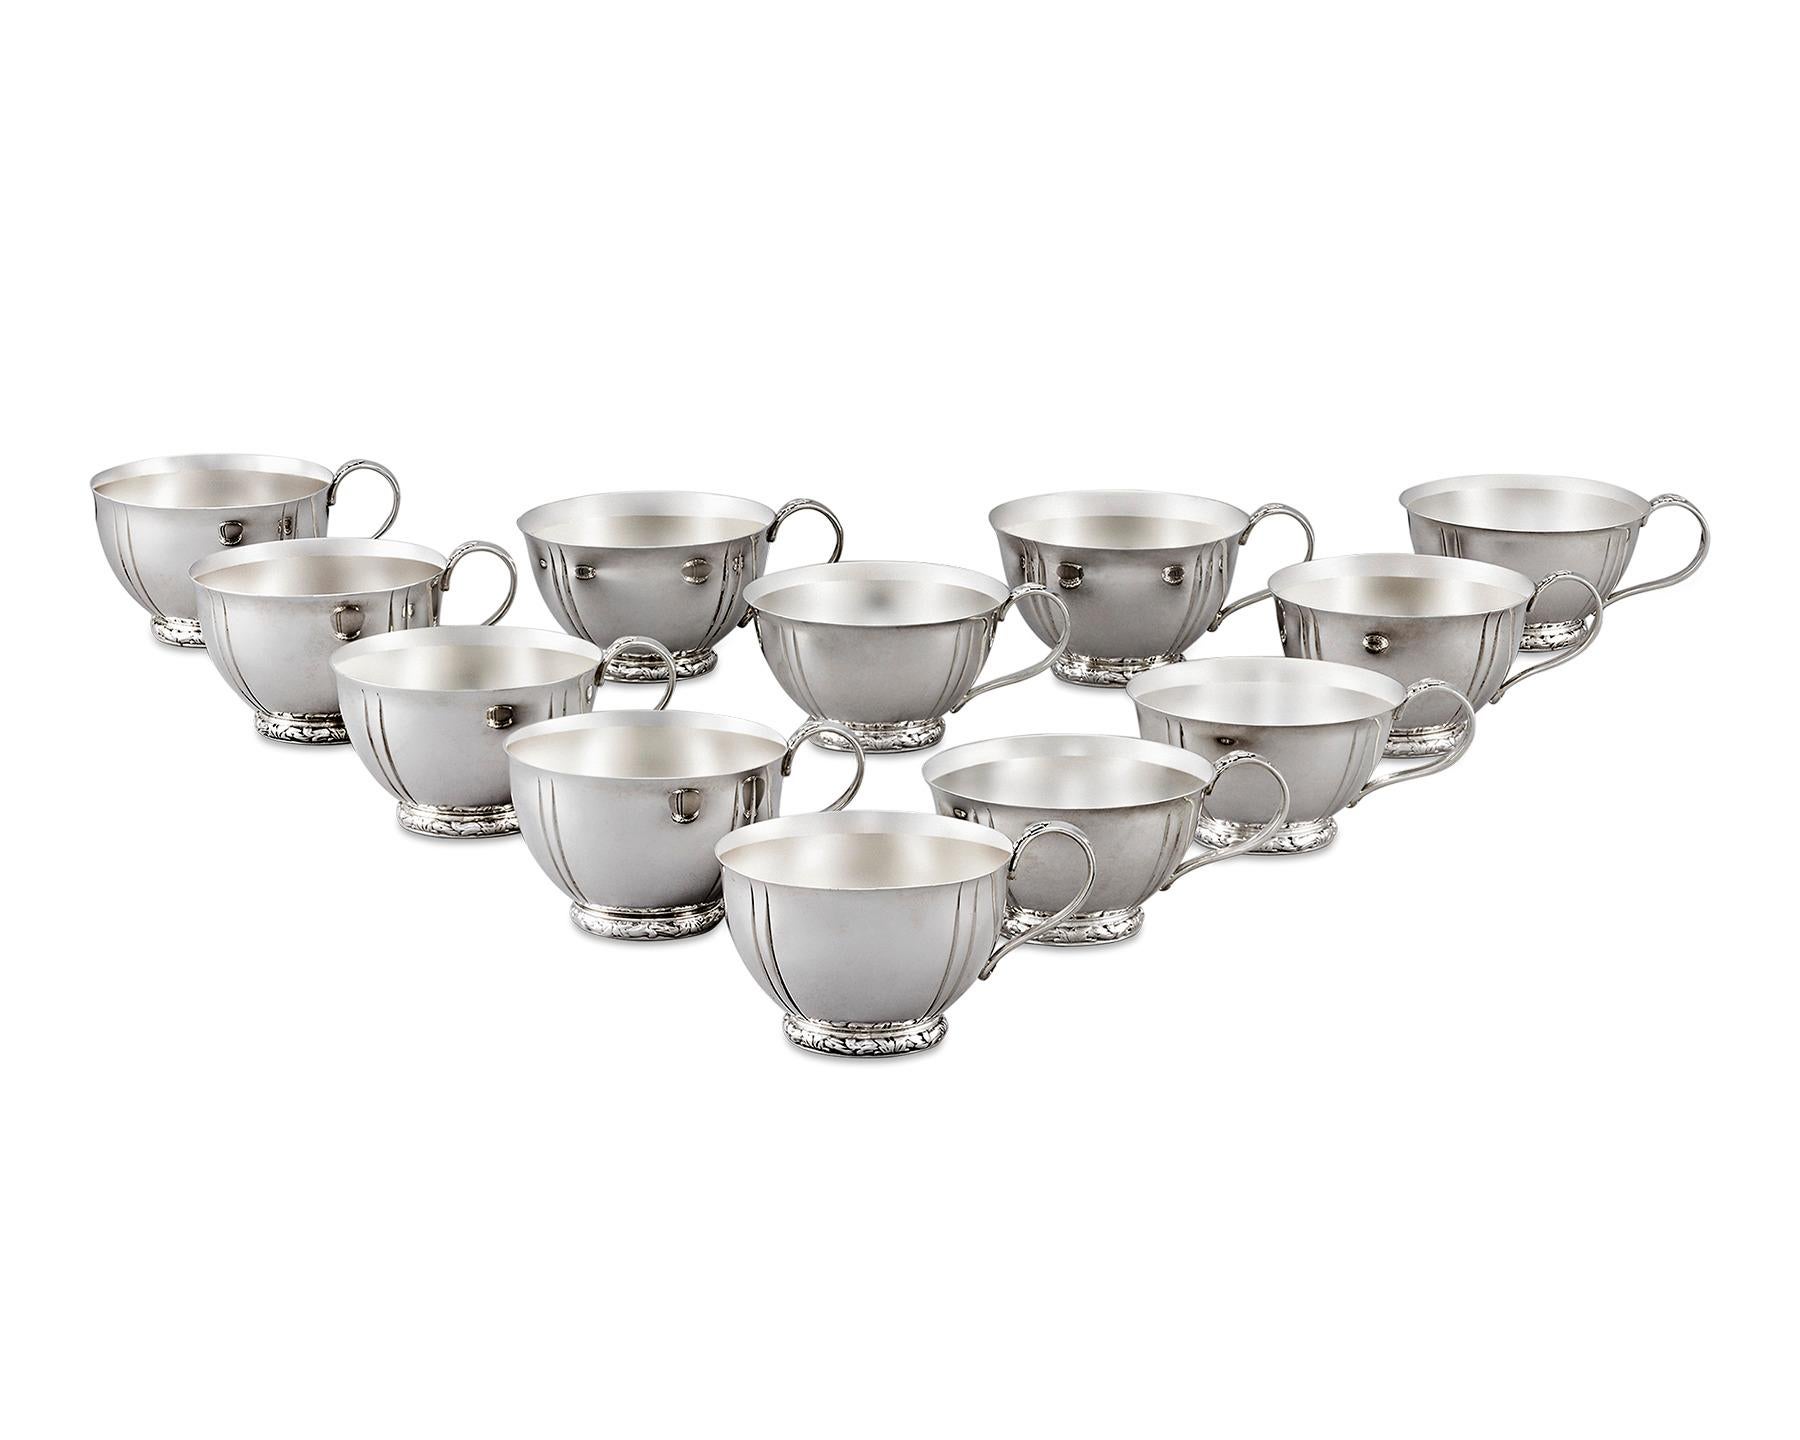 American Sterling Silver Punch Cups by Tiffany & Co.